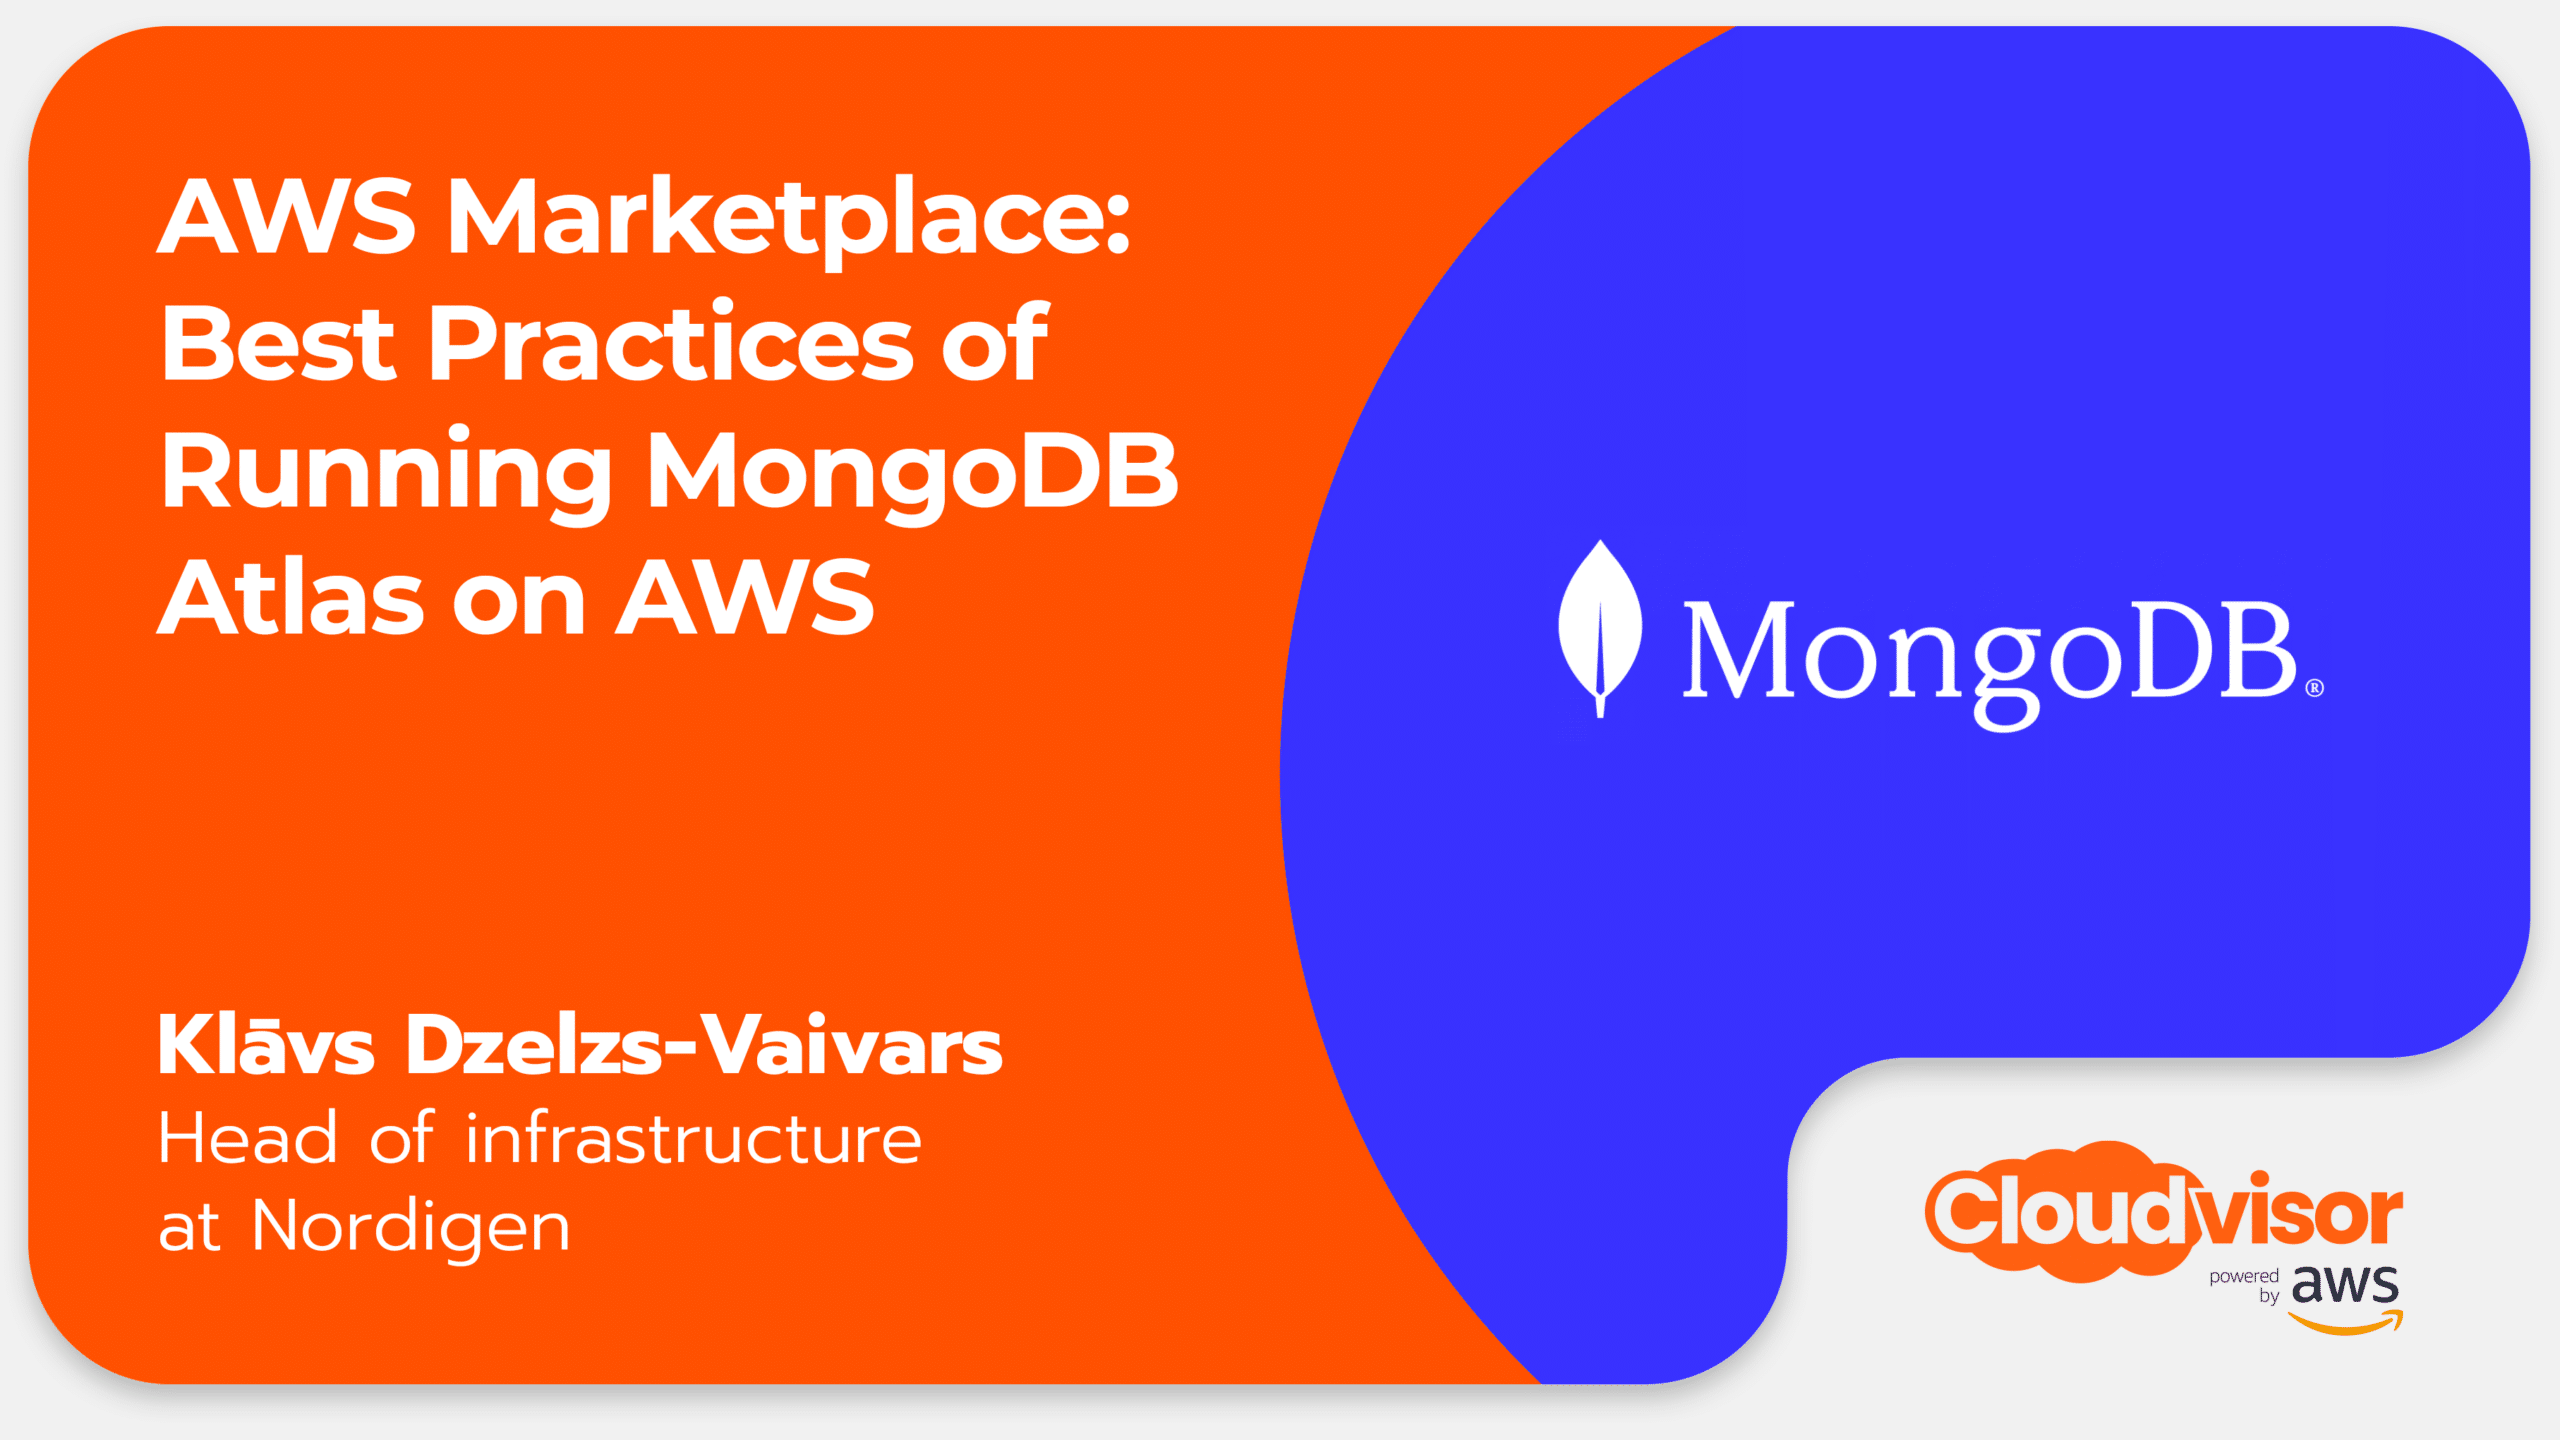 AWS Marketplace: Best Practices of Running MongoDB Atlas on AWS